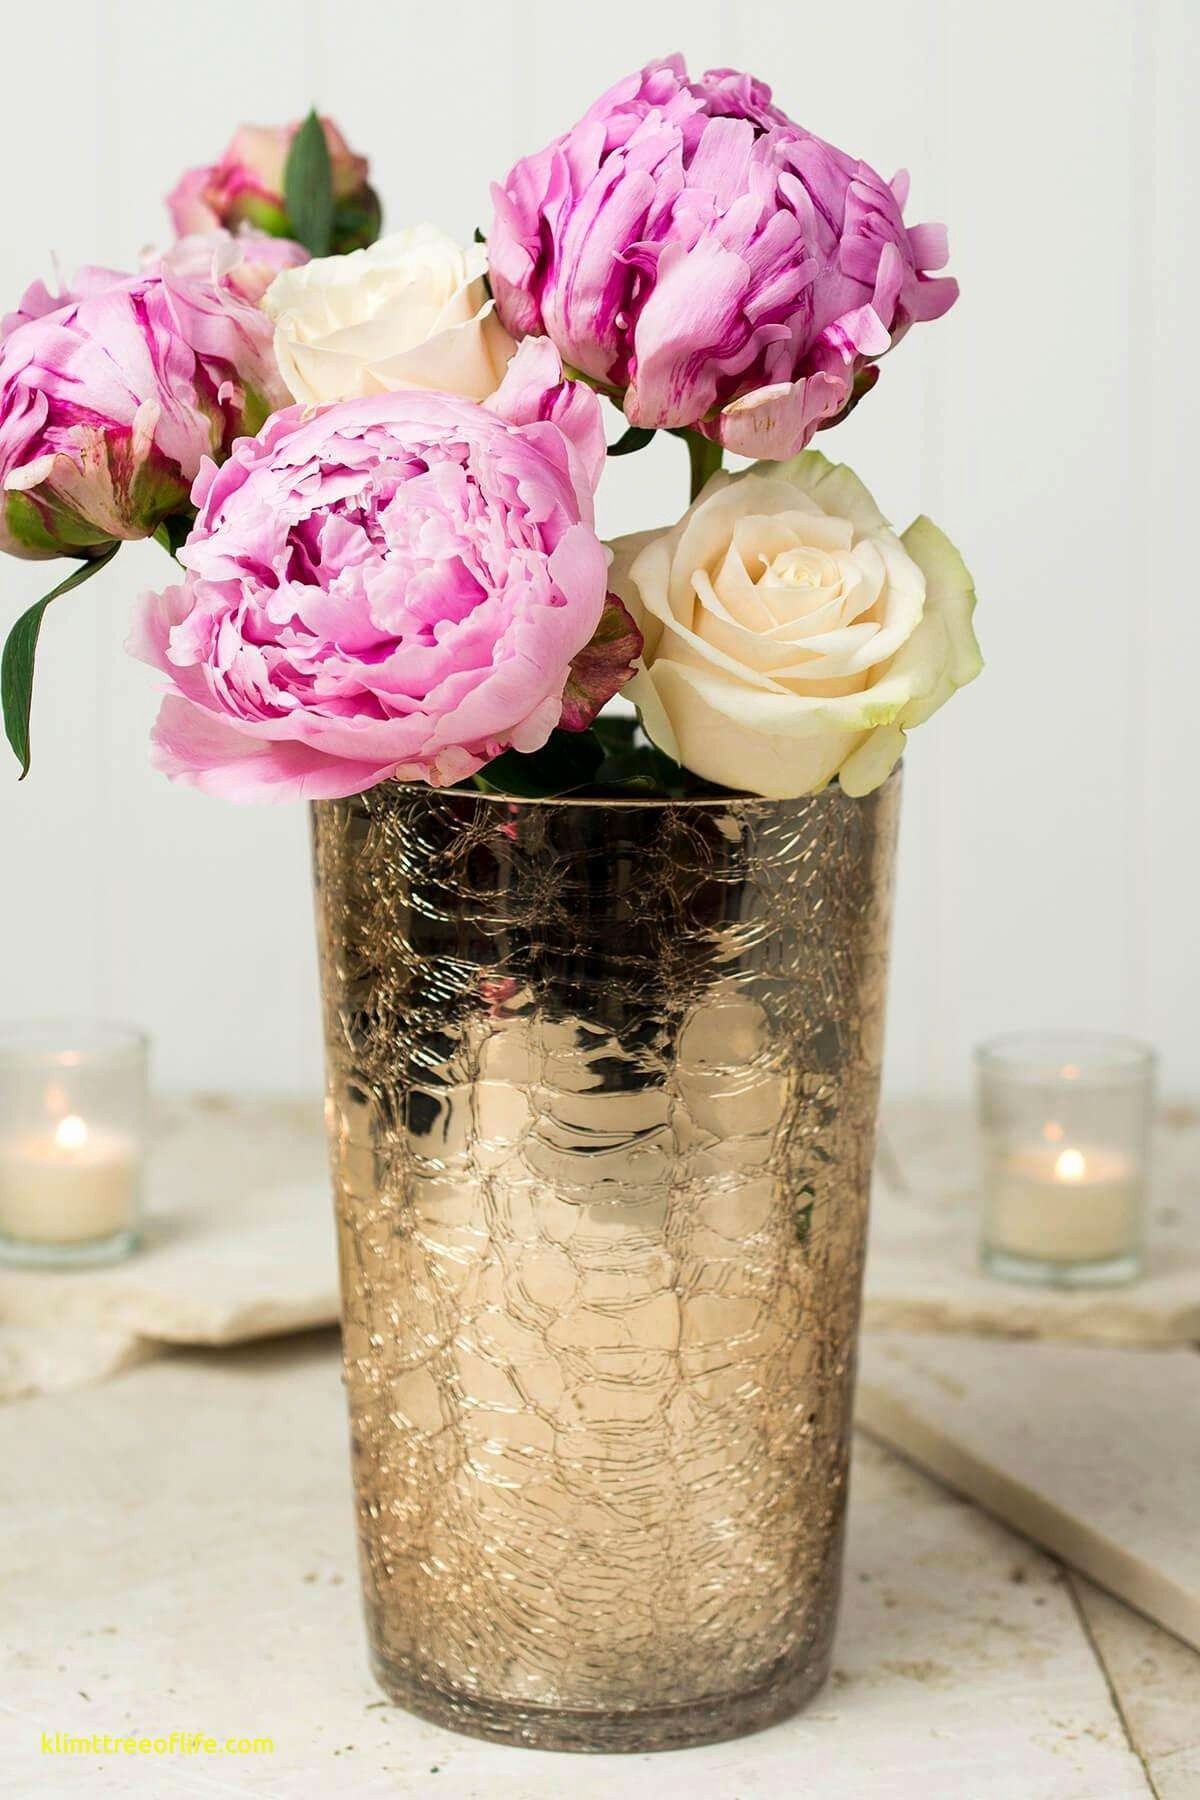 19 Recommended Rustic Metal Flower Vase 2024 free download rustic metal flower vase of flower wall decor beau flower decor wall luxury il fullxfull h vases inside flower decor wall luxury il fullxfull h vases hanging wall 2 wine